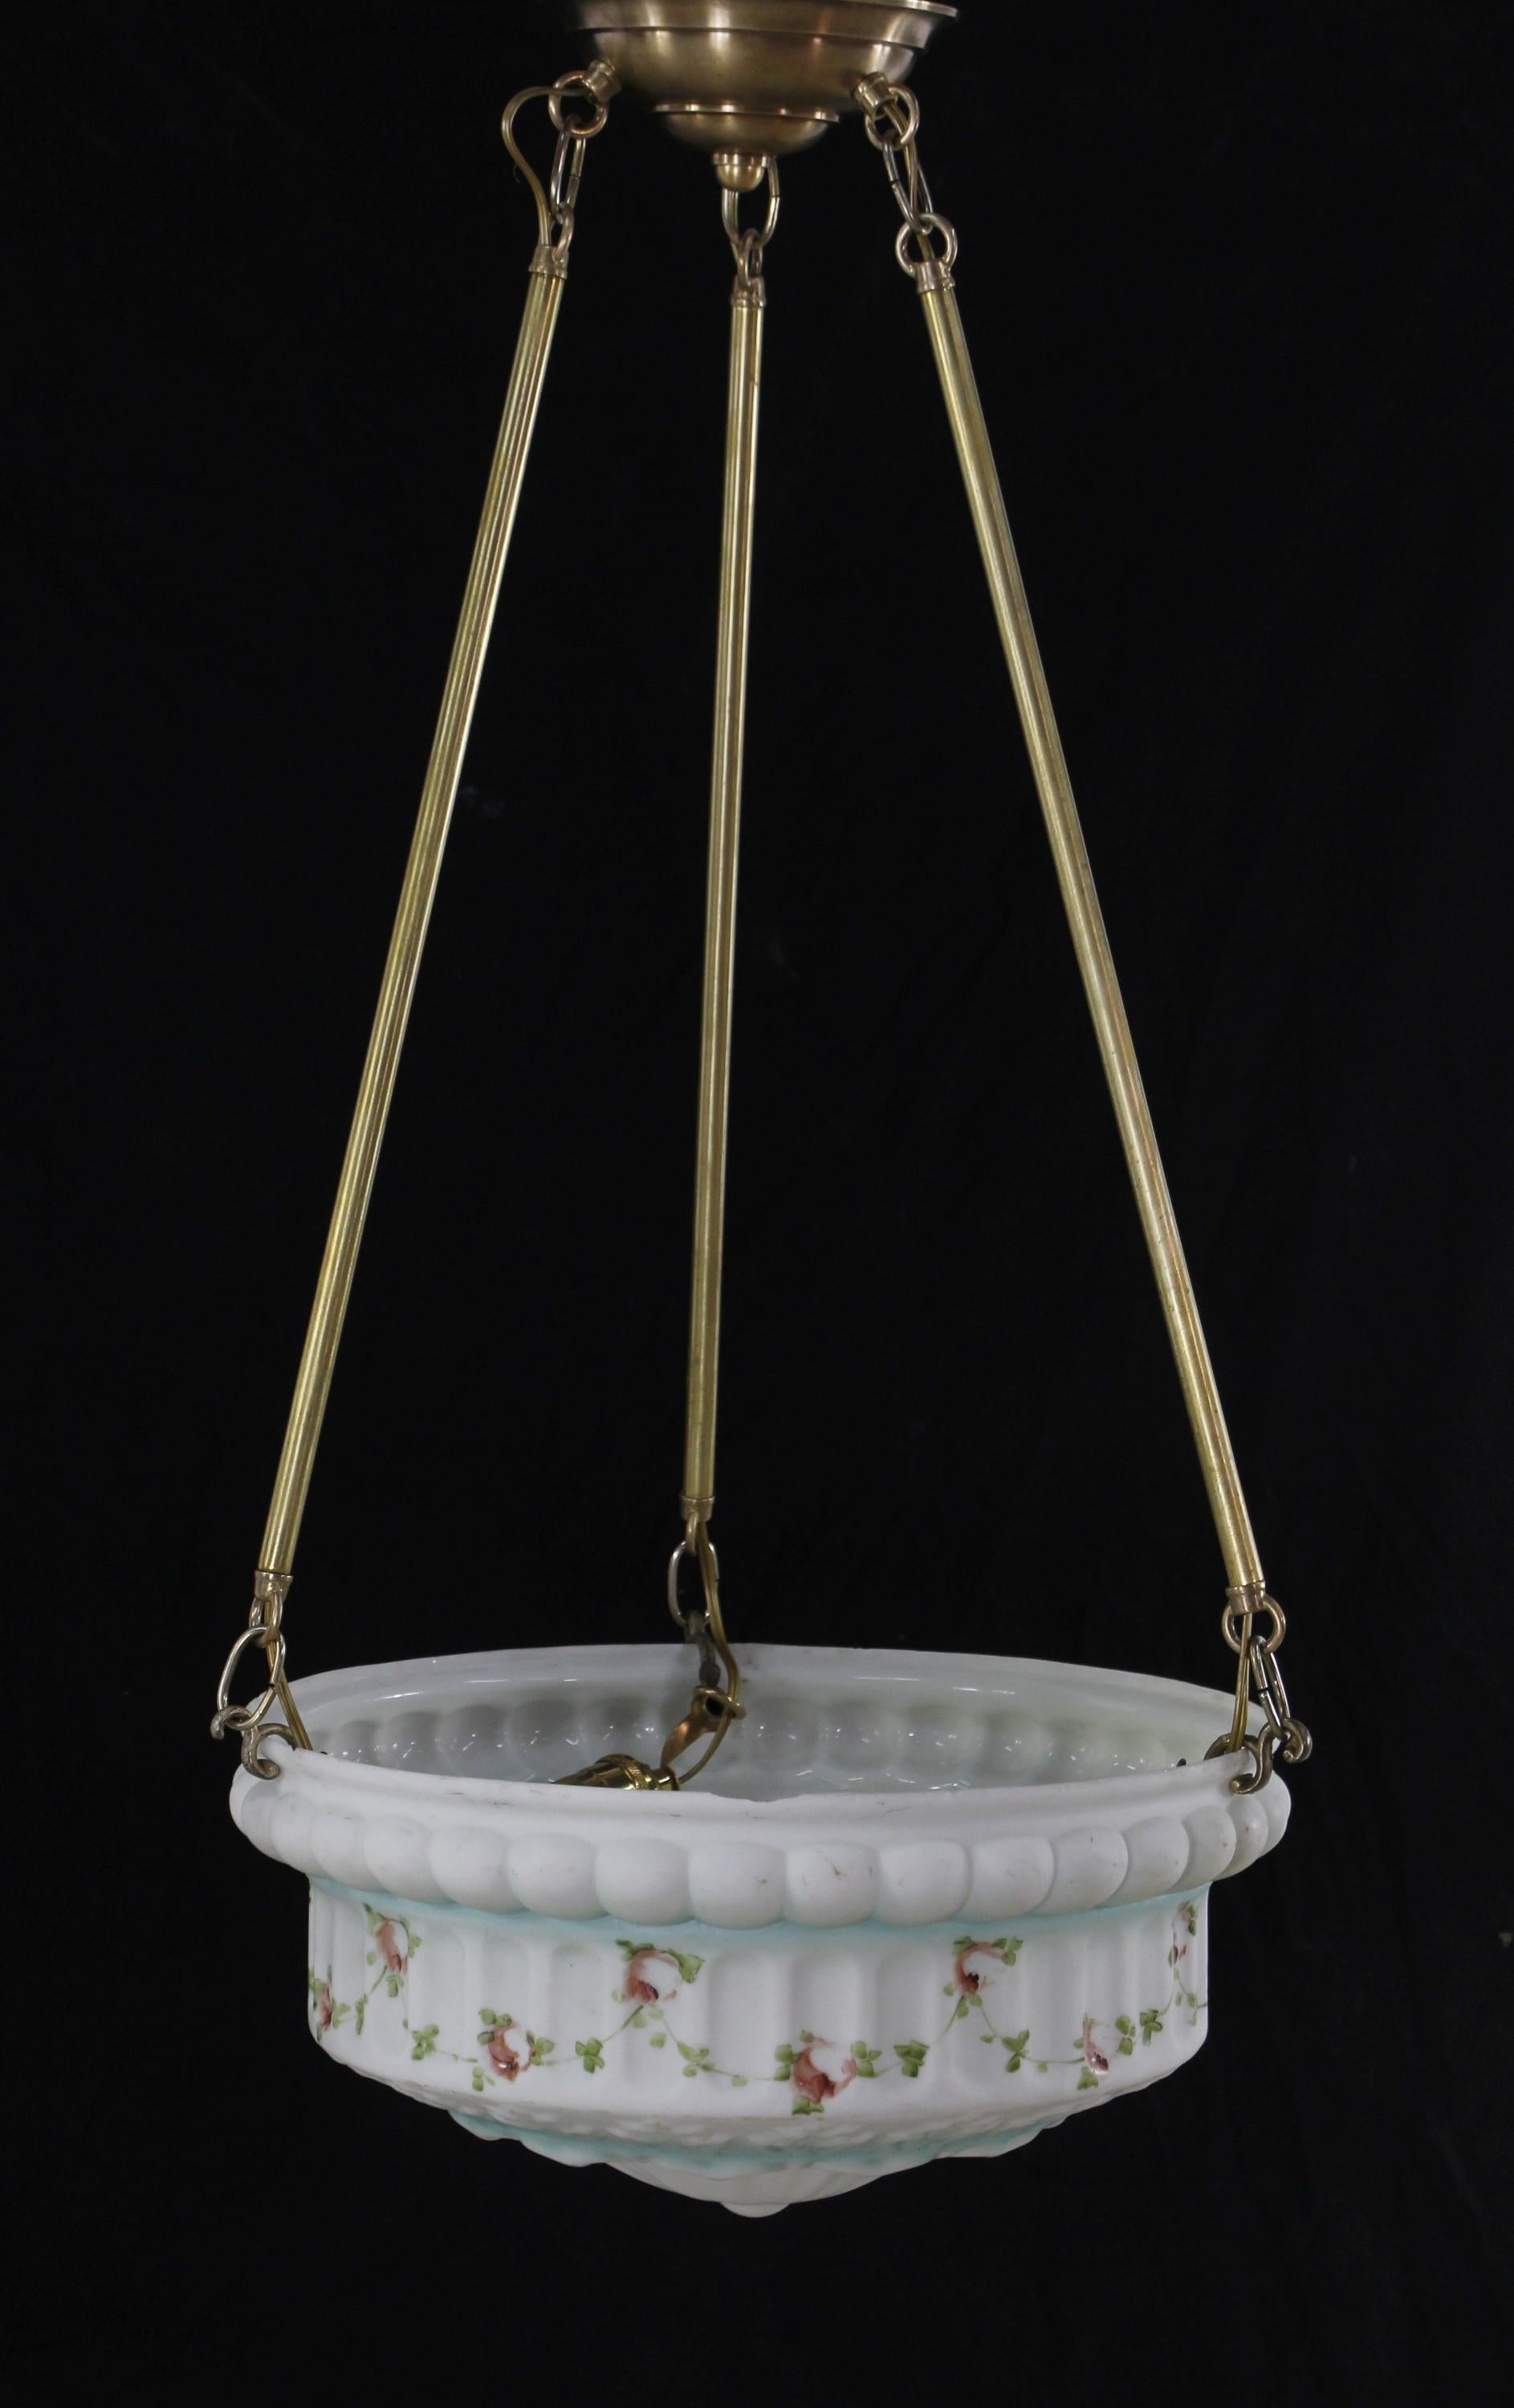 White cast glass antique dish pendant light with painted pink floral and green foliate details with splashes of blue. This light is suspended from three brass poles with a brass canopy. Cleaned and restored. There are minor chips along the rim and